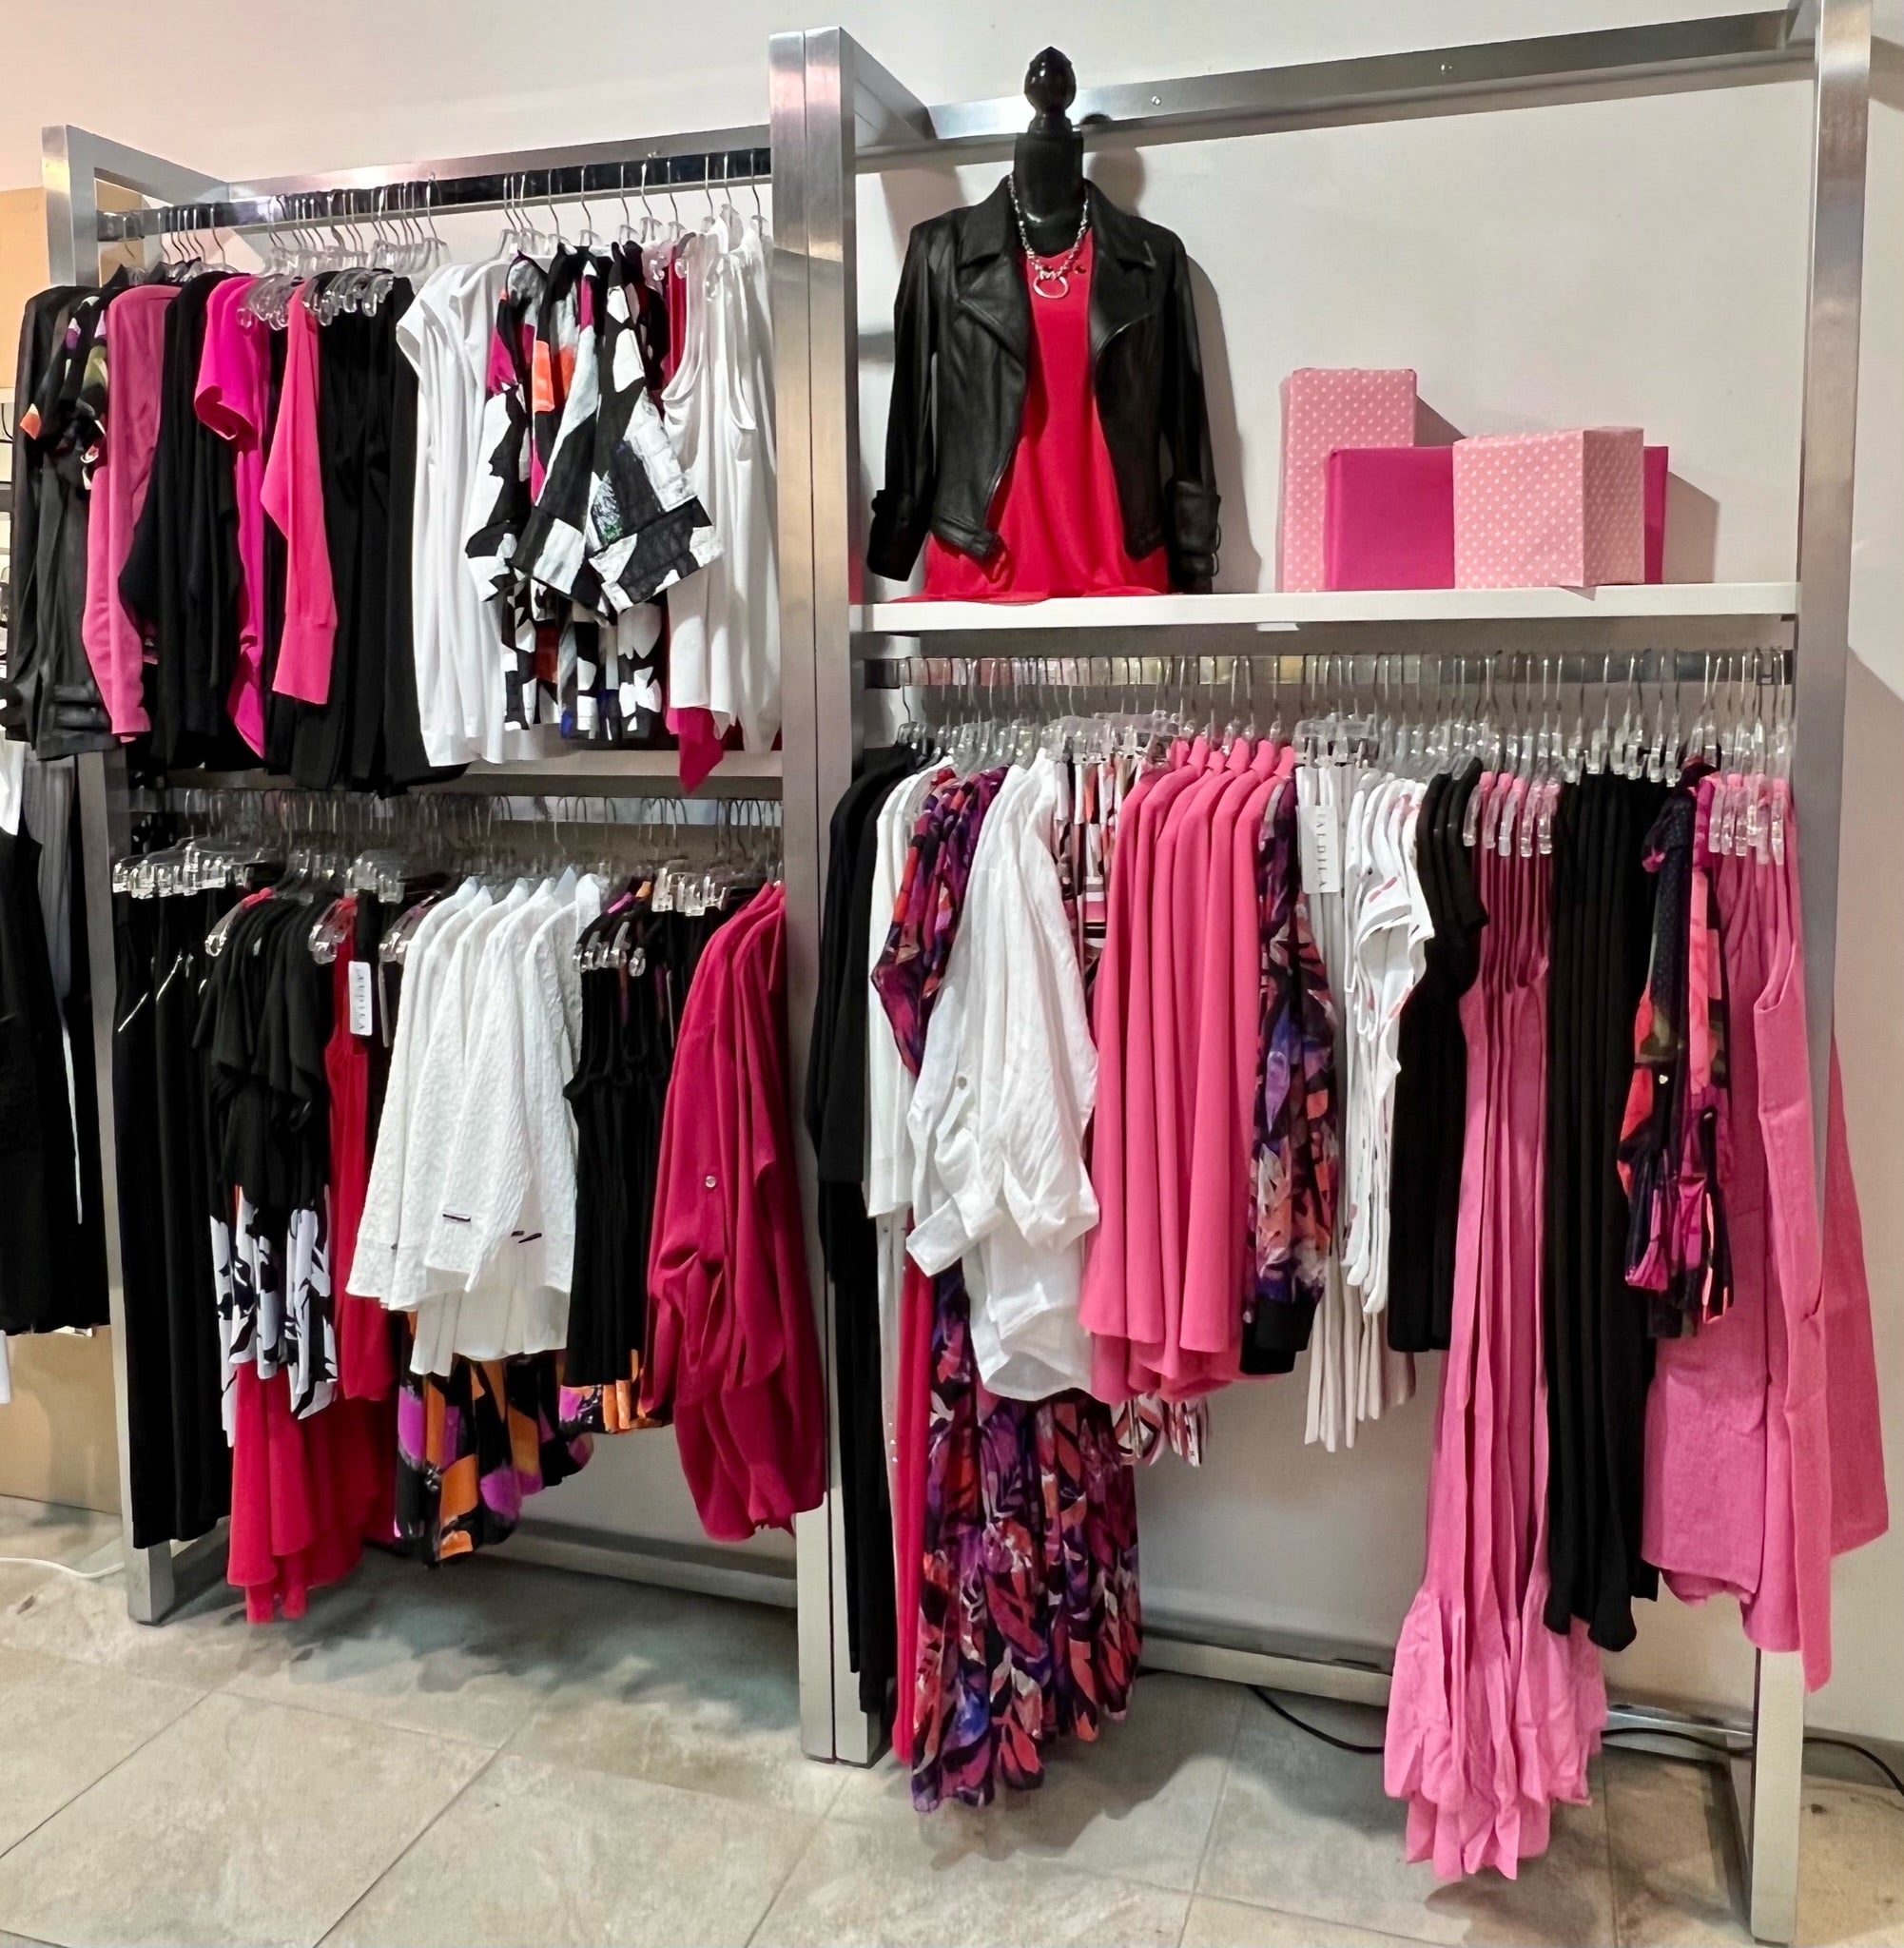 Women's Clothing for sale in Edson, Alberta